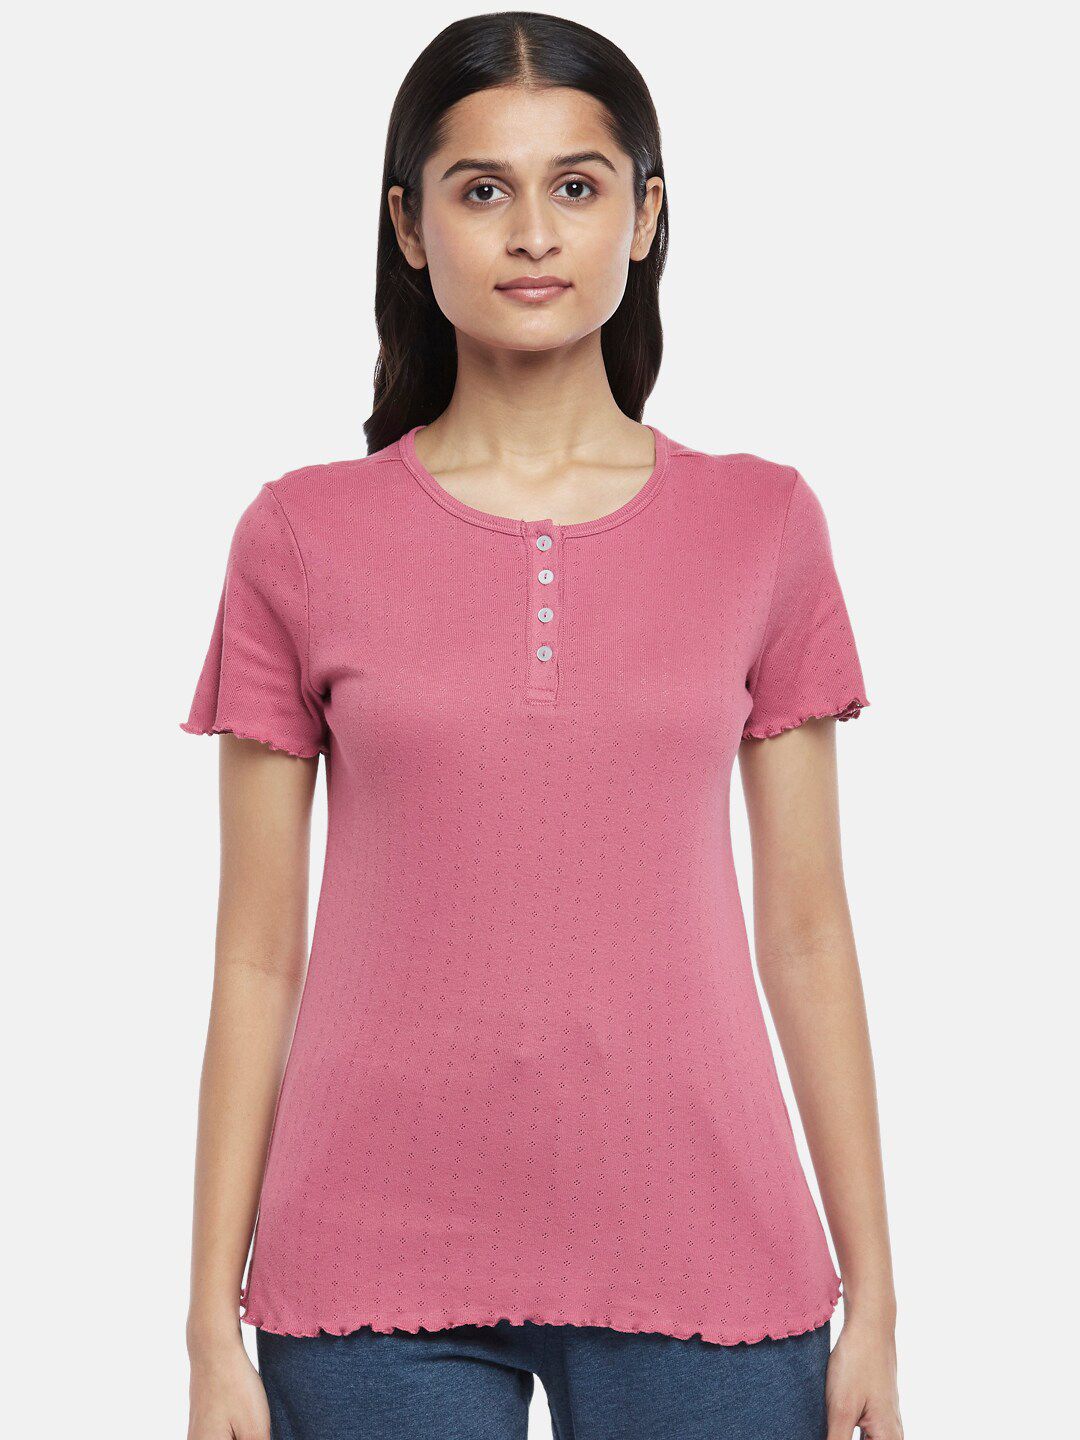 Dreamz by Pantaloons Pink Pure Cotton Lounge T-Shirt Price in India